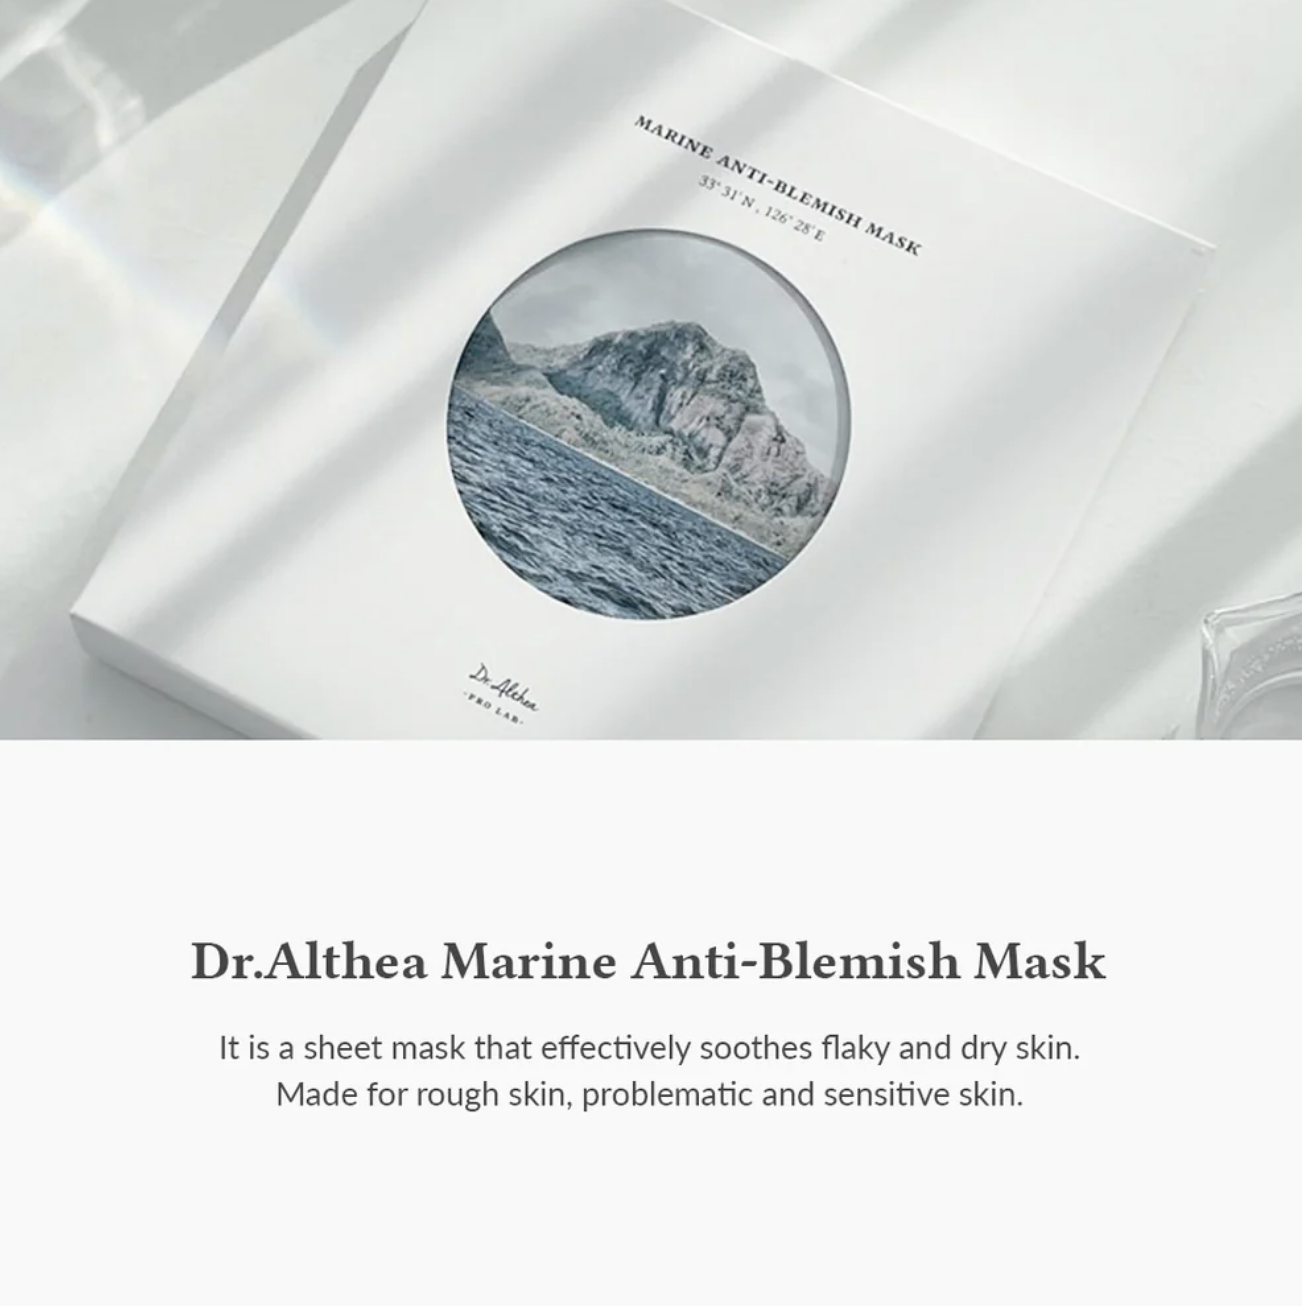 Dr.Althea	Marine Anti-Blemish Mask - 1 Pack of 5 Sheets